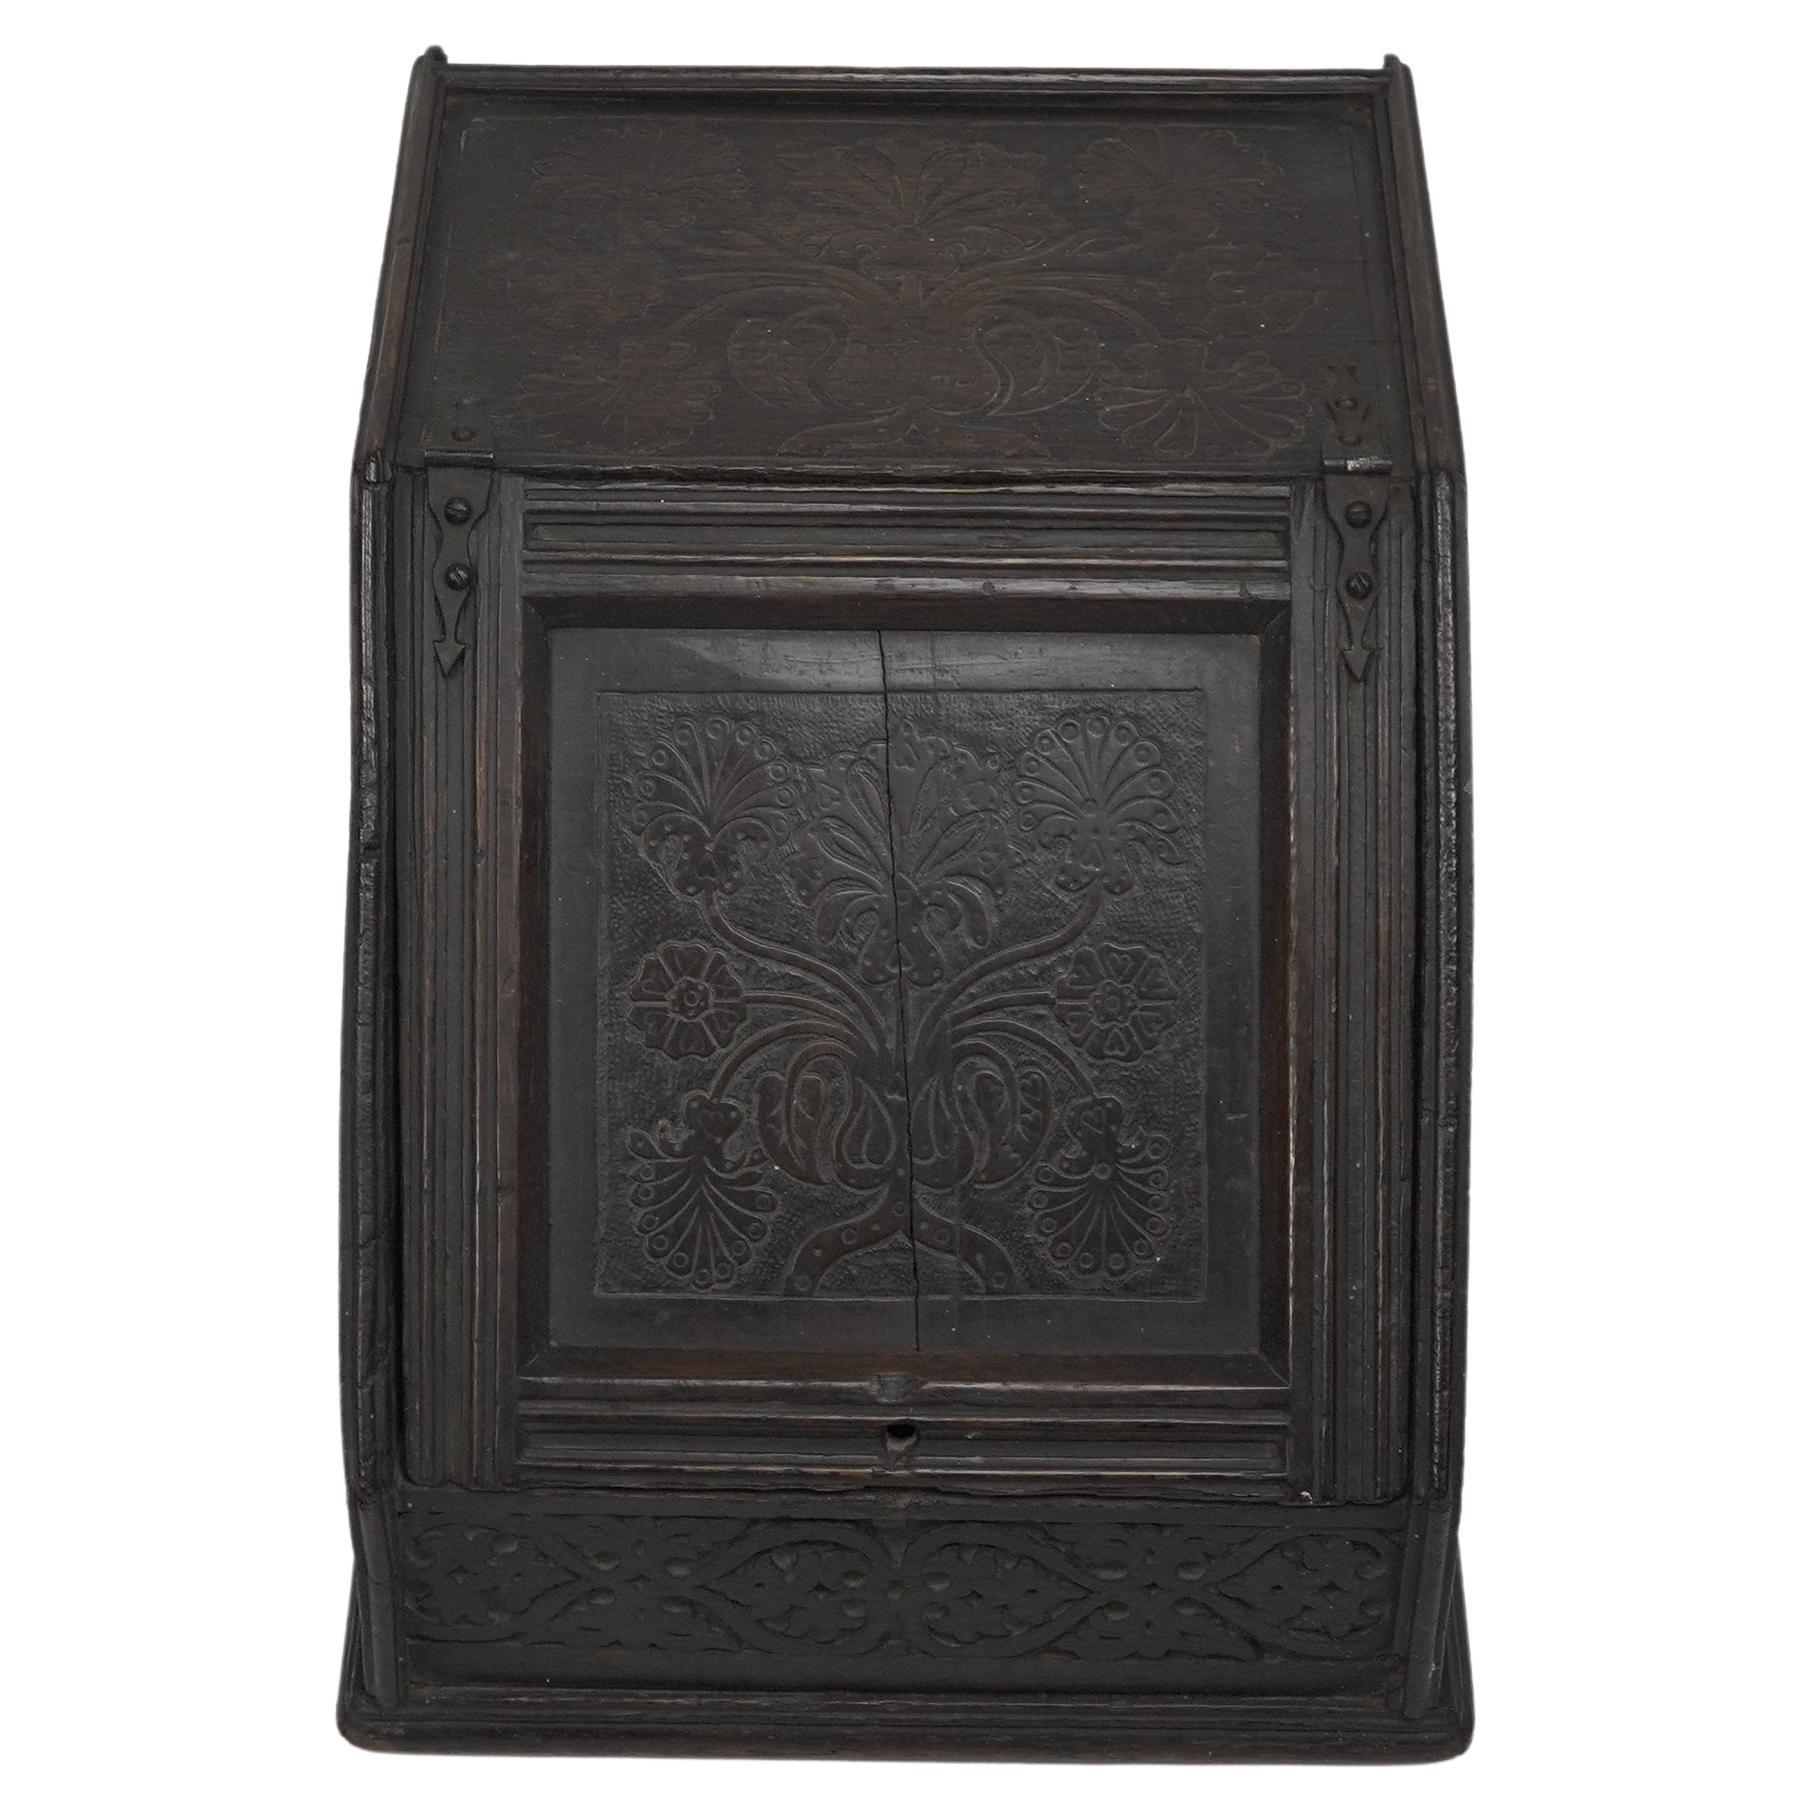 An Aesthetic Movement dark oak coal box in the style of Daniel Cottier. With all over shallow carved floral decoration.
